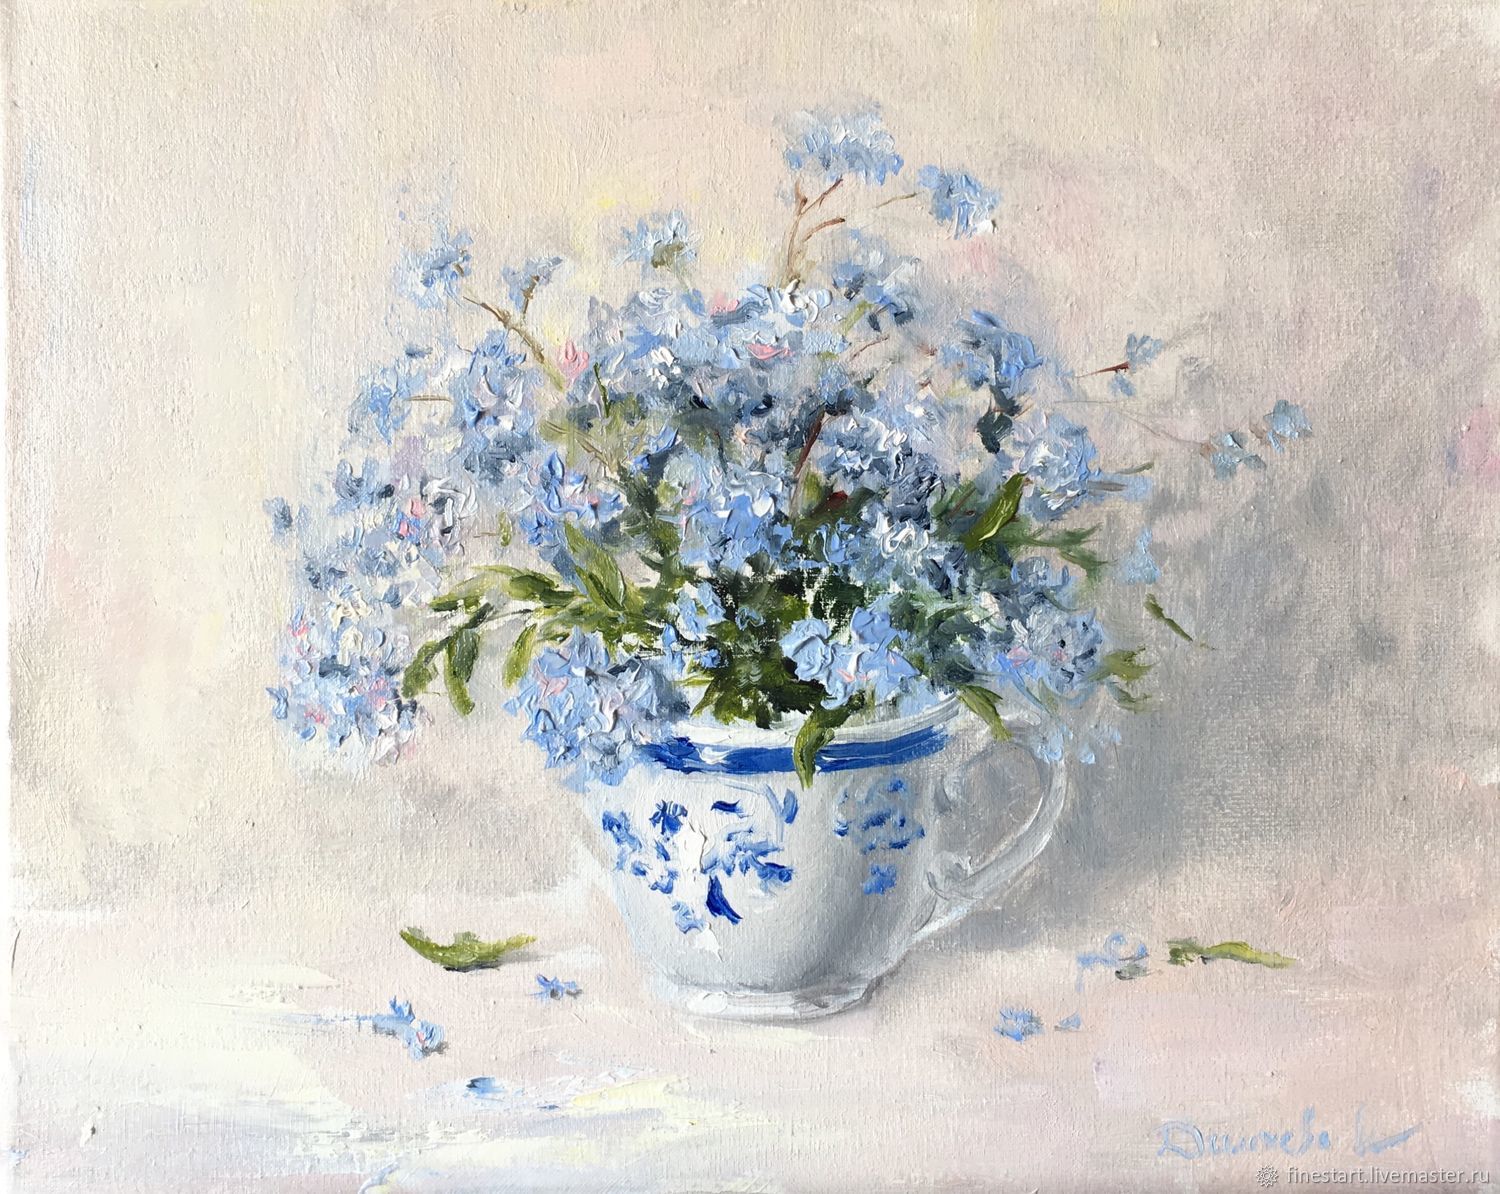 Oil Painting Of Forget Me Not Impressionism Kupit Na Yarmarke Masterov Irou9com Pictures Tula